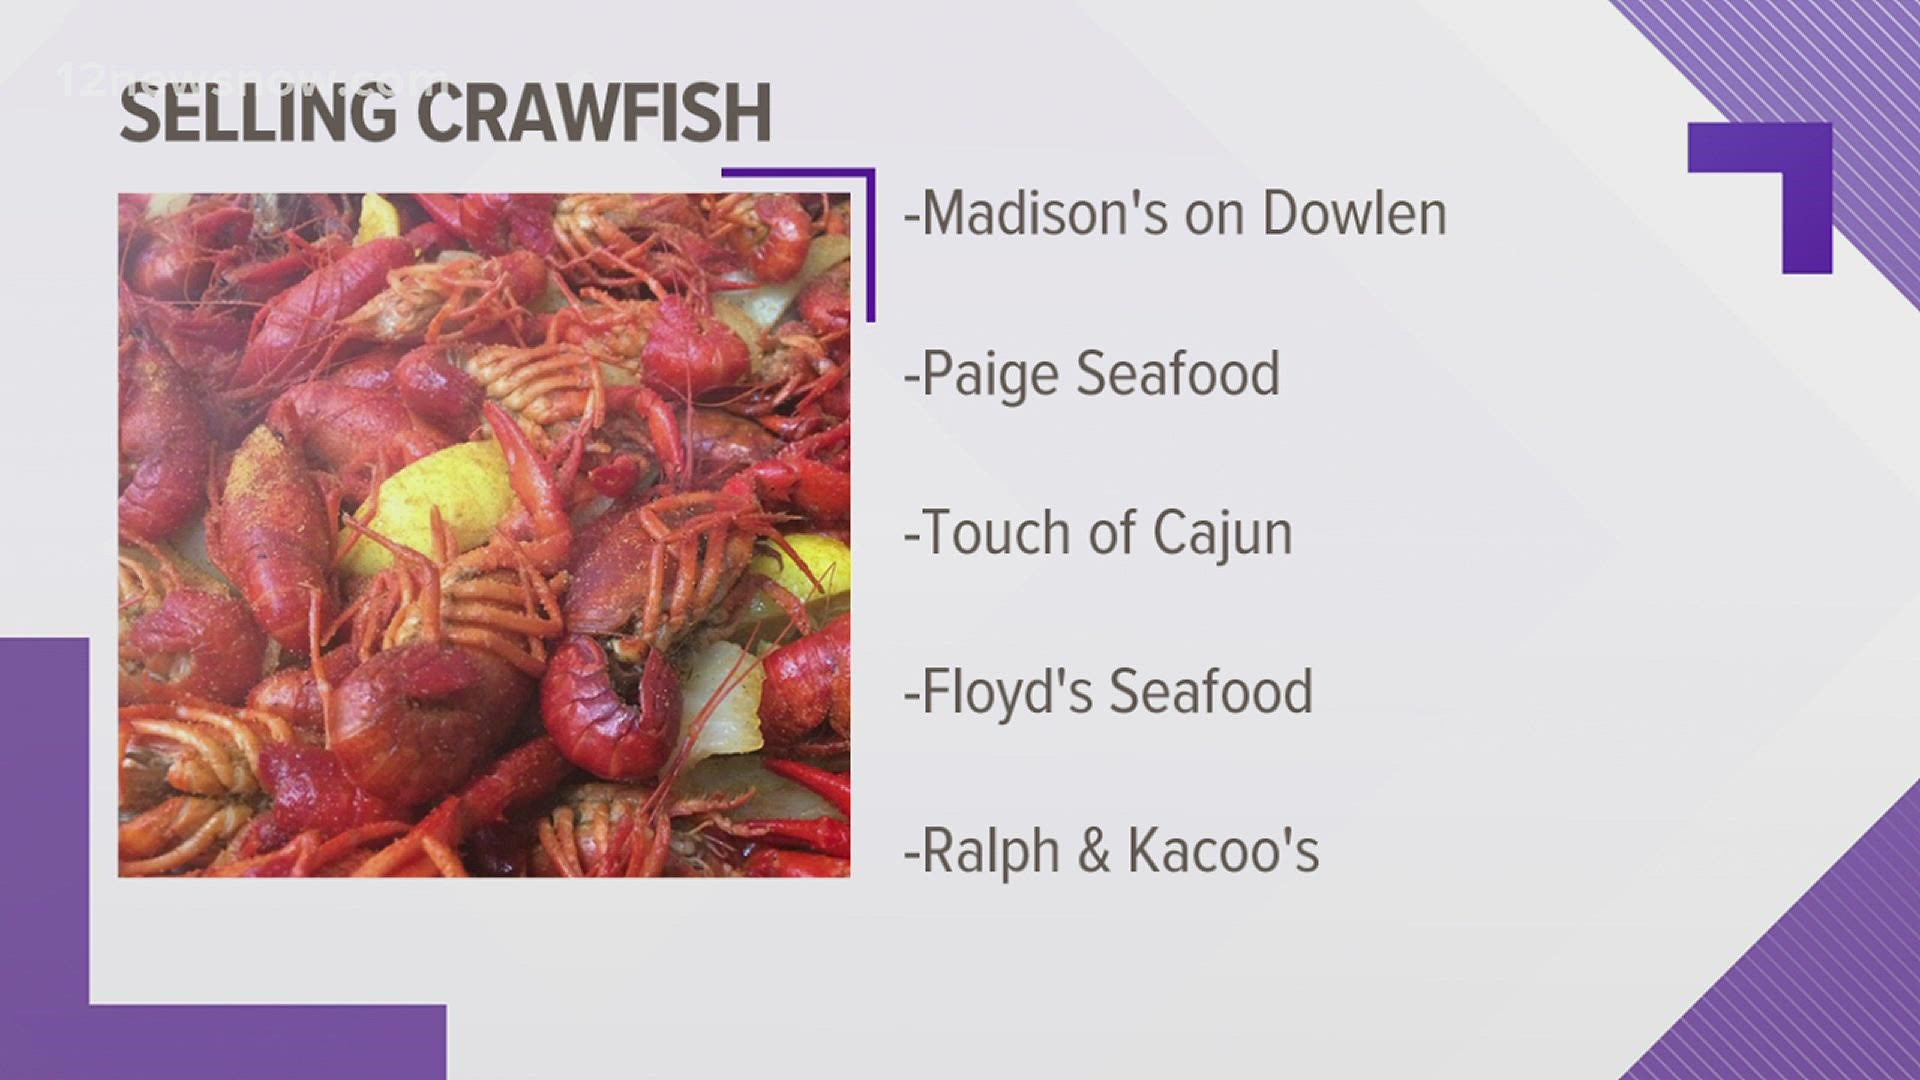 Seafood owners who sell crawfish are optimistic about the season as it's off to a great start.